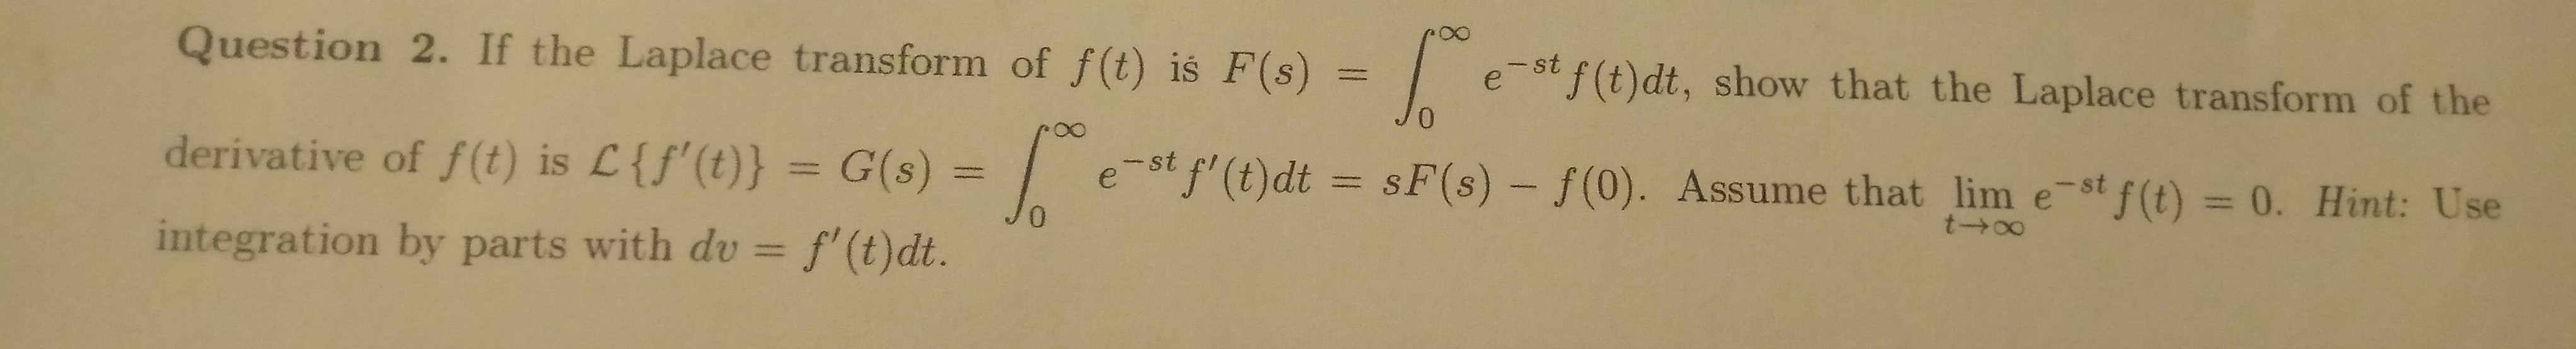 Question 2. If the Laplace transform of f(t) is F(s) =
e-st f(t)dt, show that the Laplace transform of the
derivative of f(t) is L{f'(t)} = G(s) = | e-st f' (t)dt = sF(s) – f(0). Assume that lim e-stf (t) = 0. Hint: Use
%3D
%3D
wit
integration bu
no
